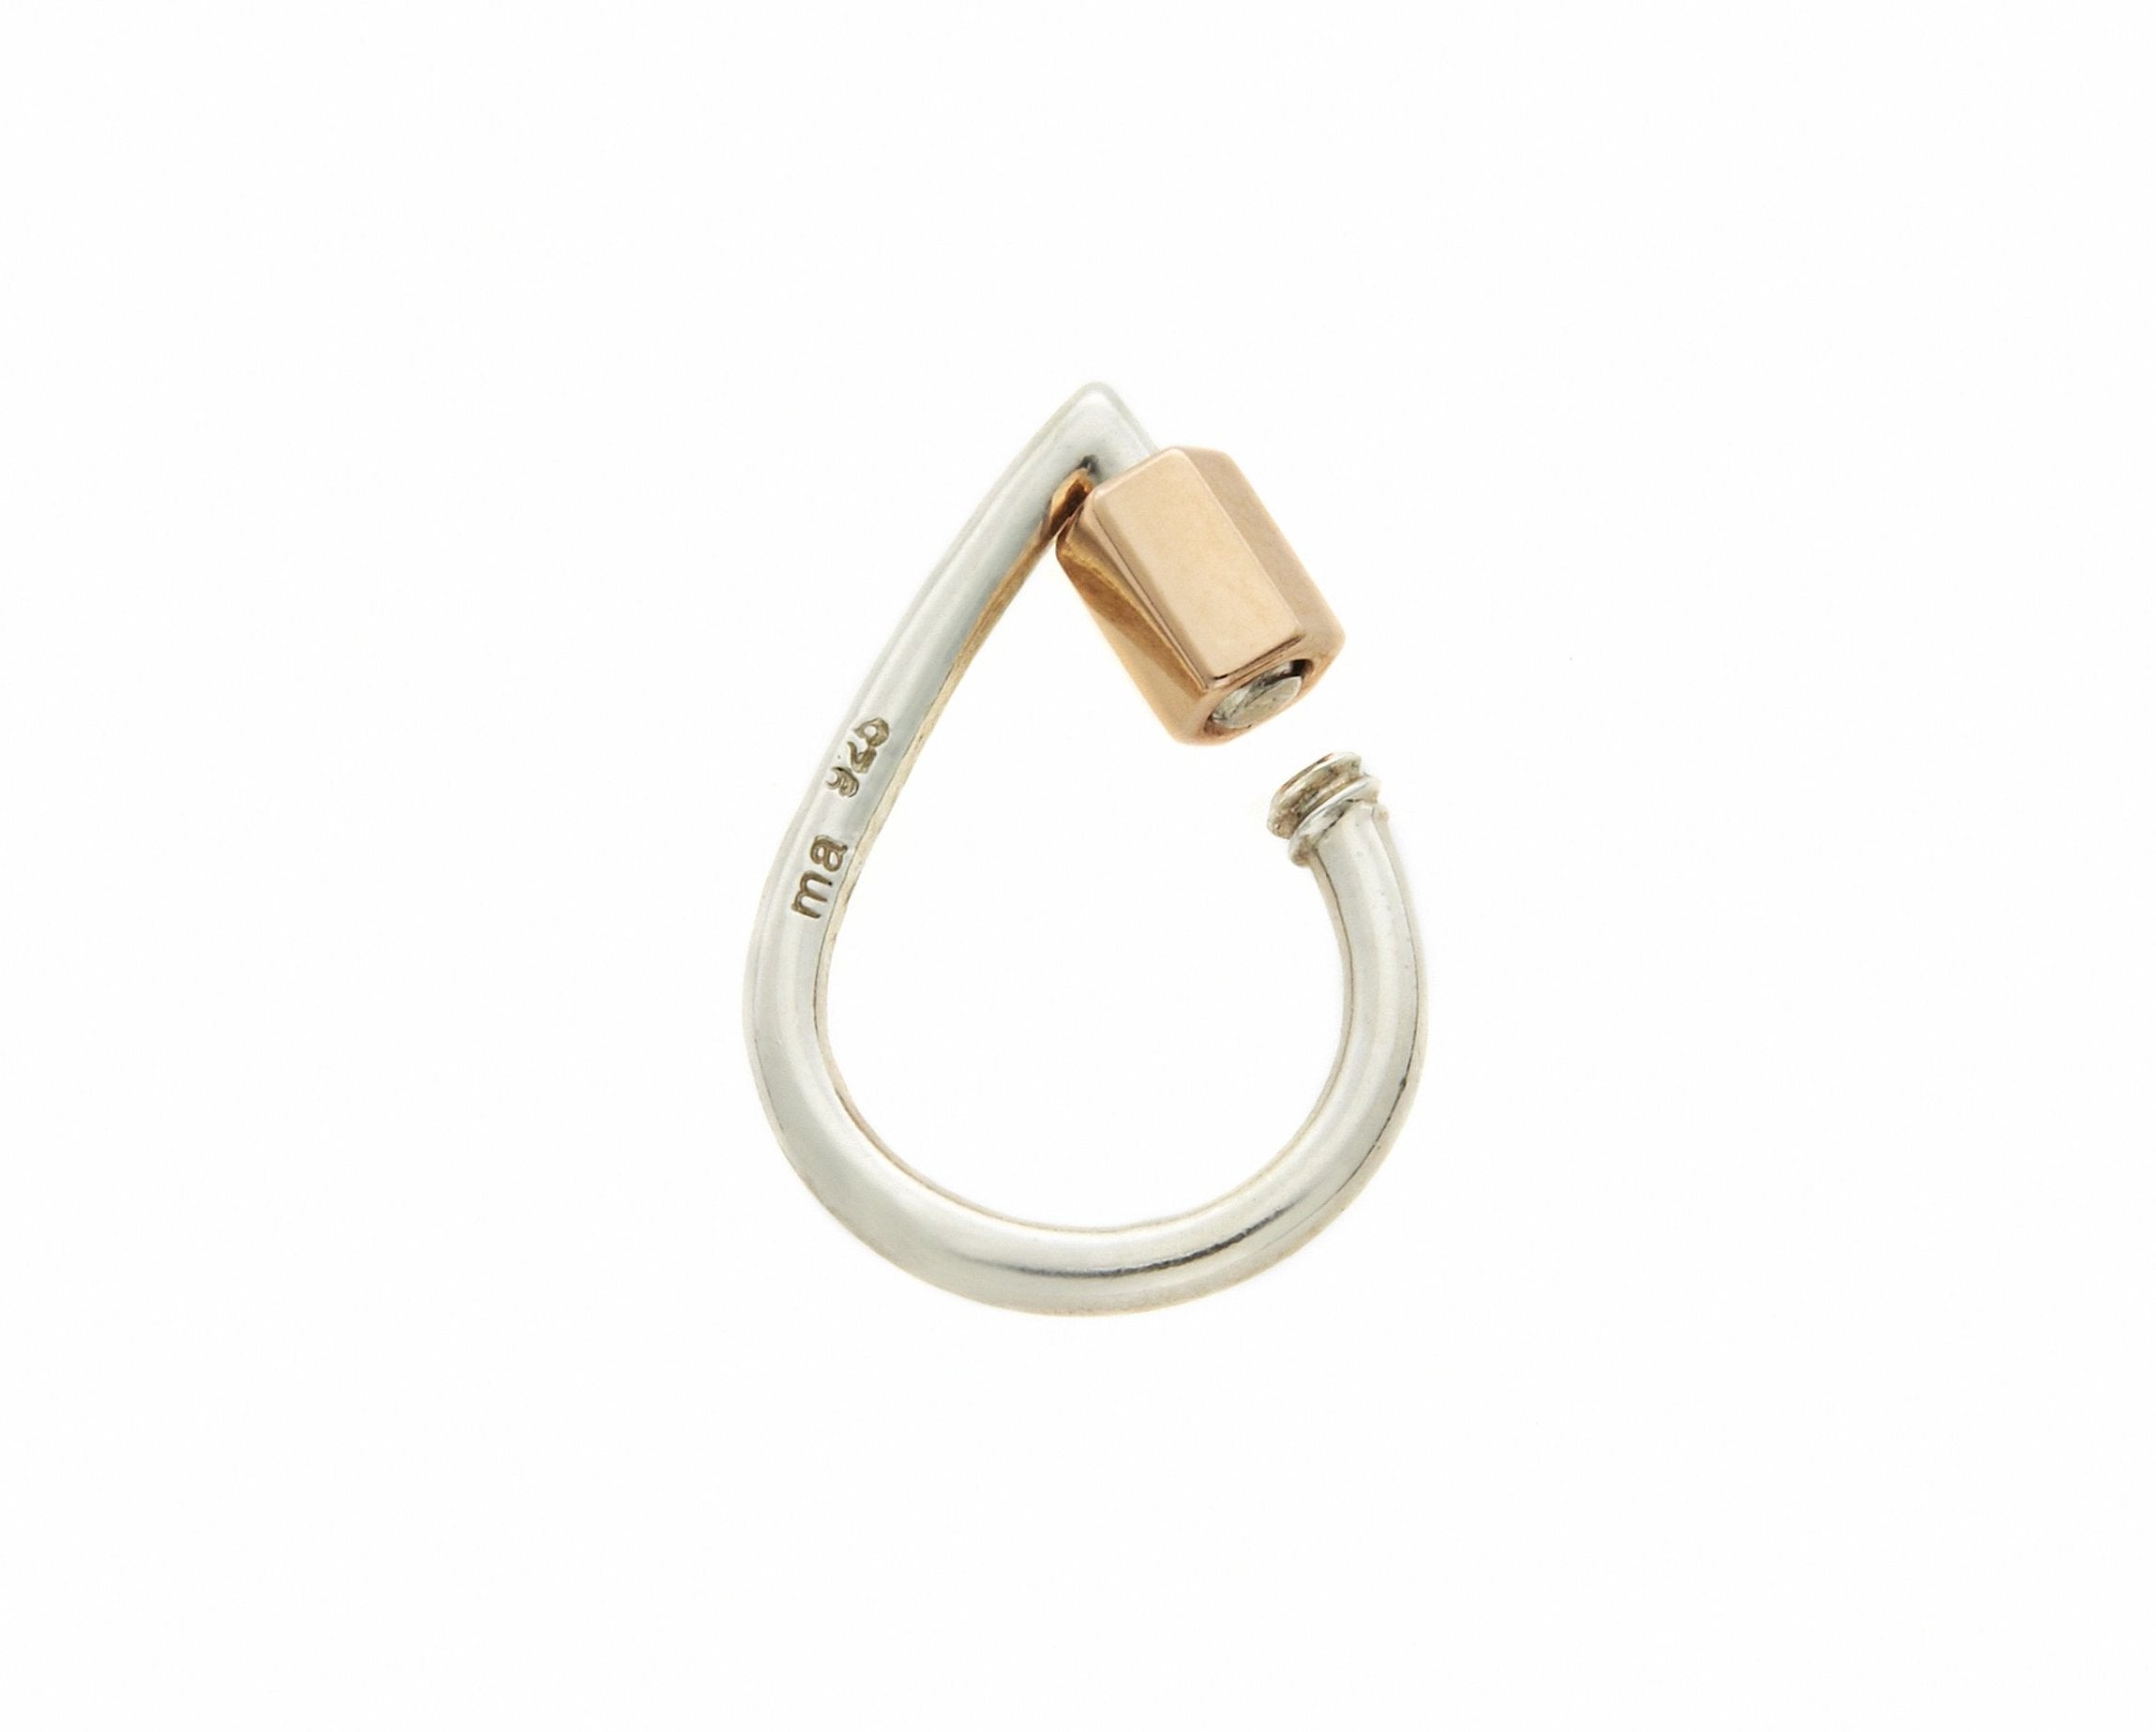 Rose gold and silver droplock with open clasp